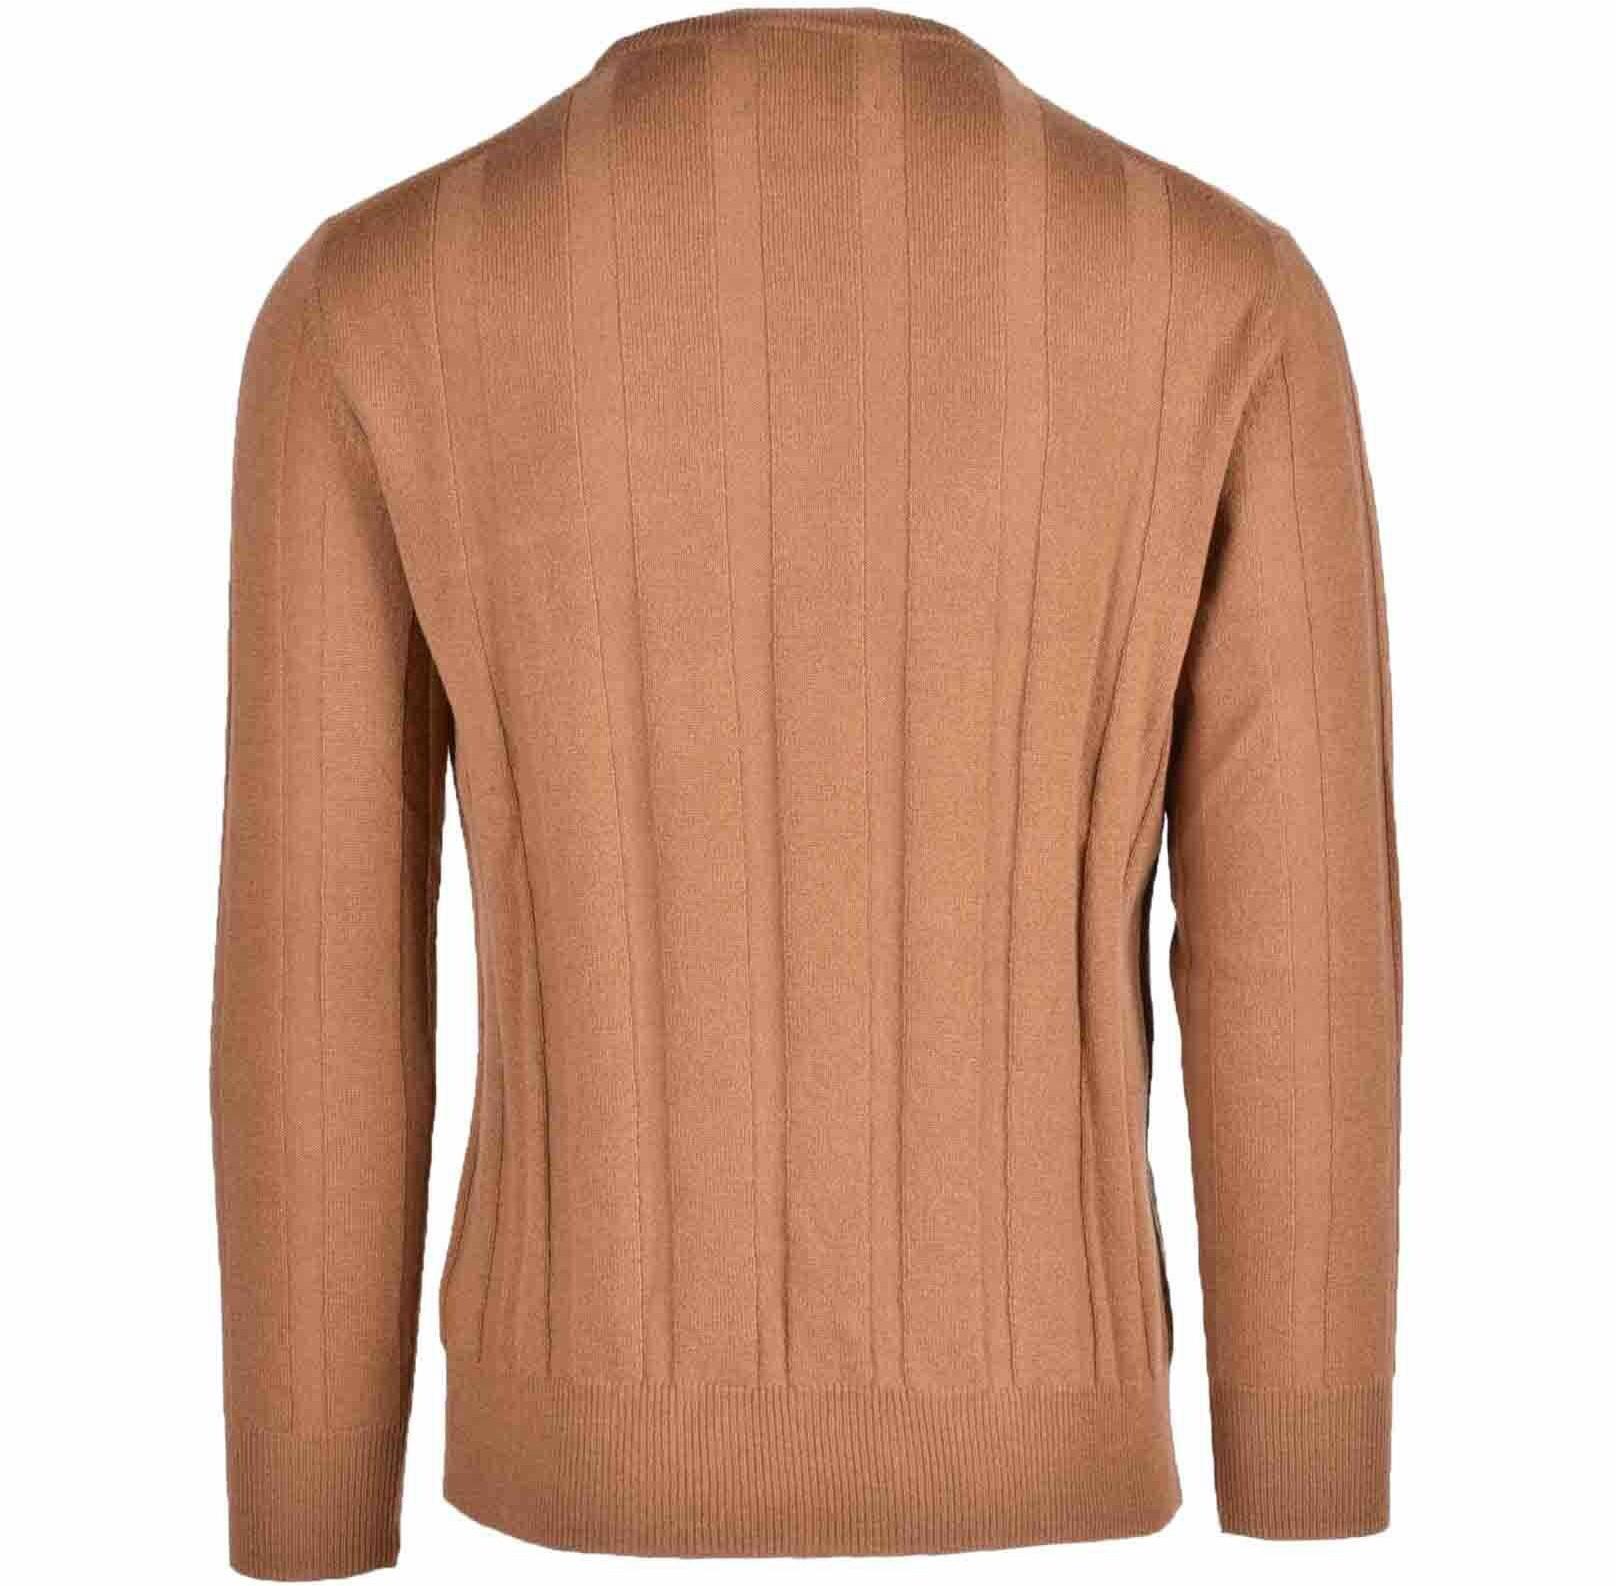 N.O.W. Men's Brown Sweater M at FORZIERI Canada